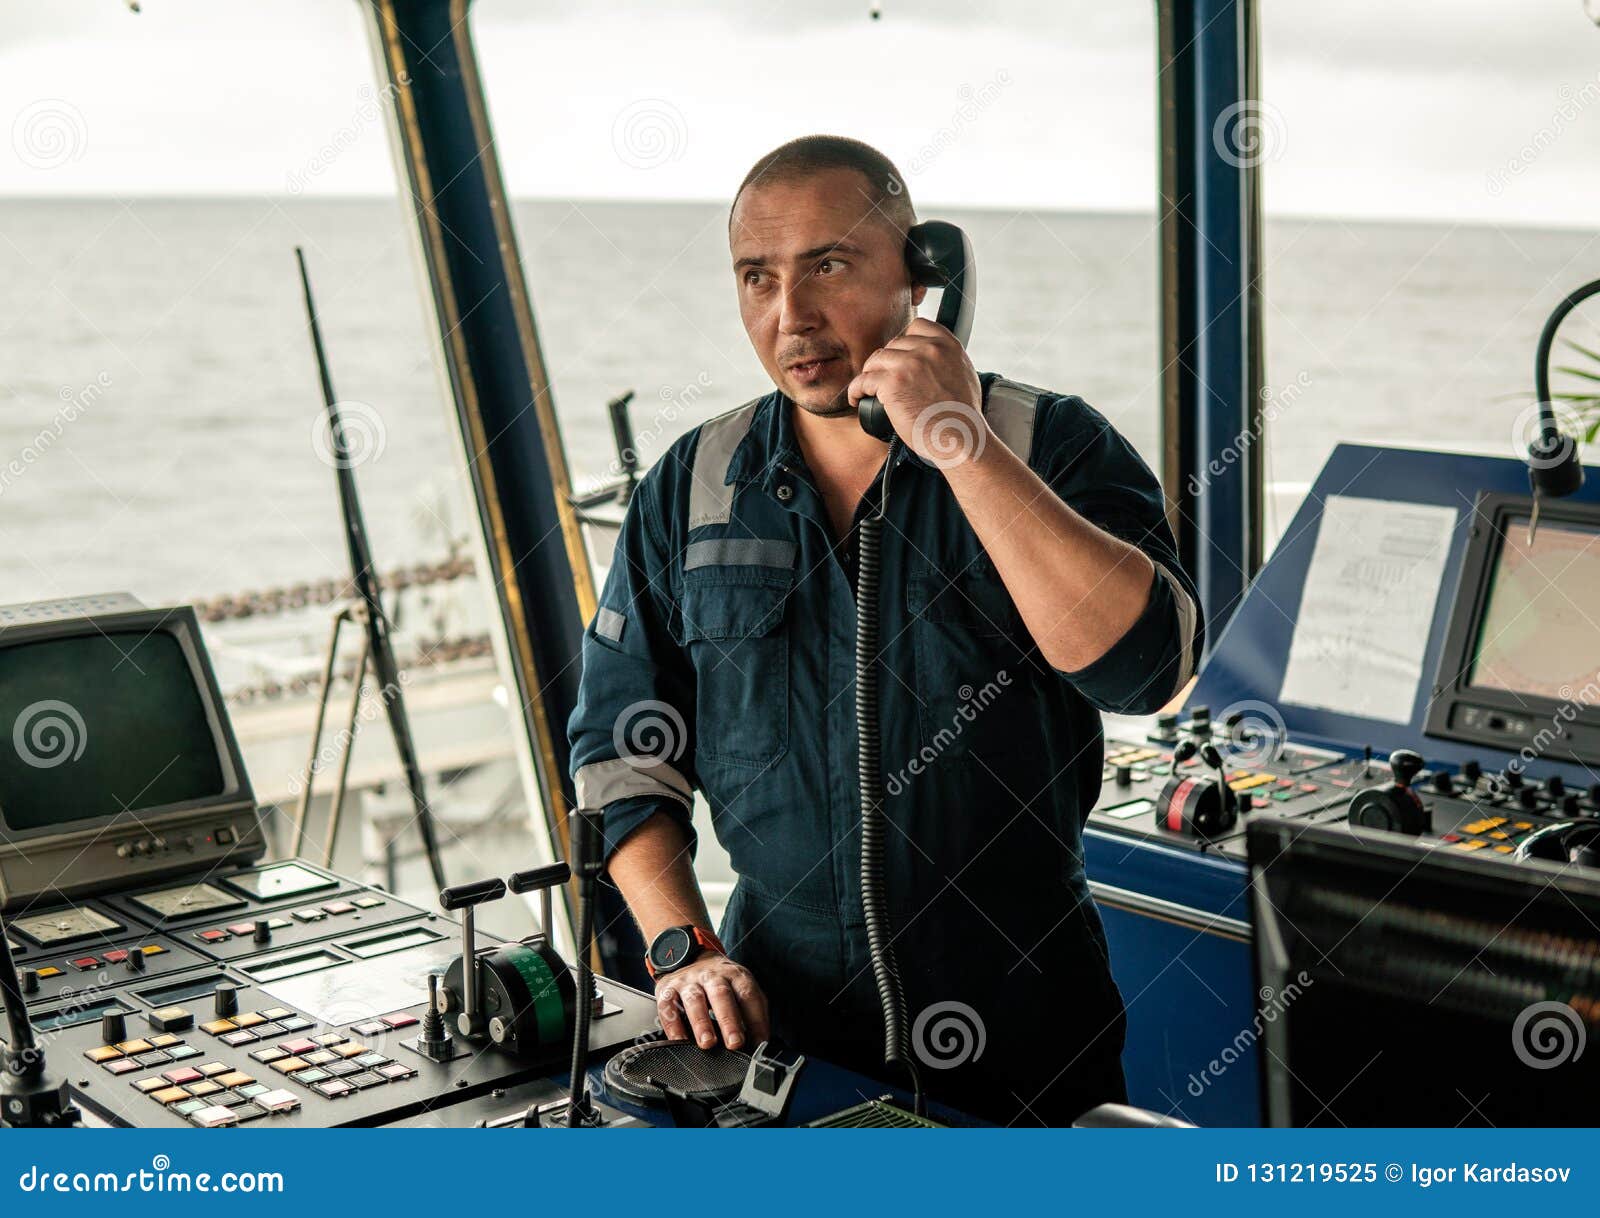 marine navigational officer is reporting by vhf radio